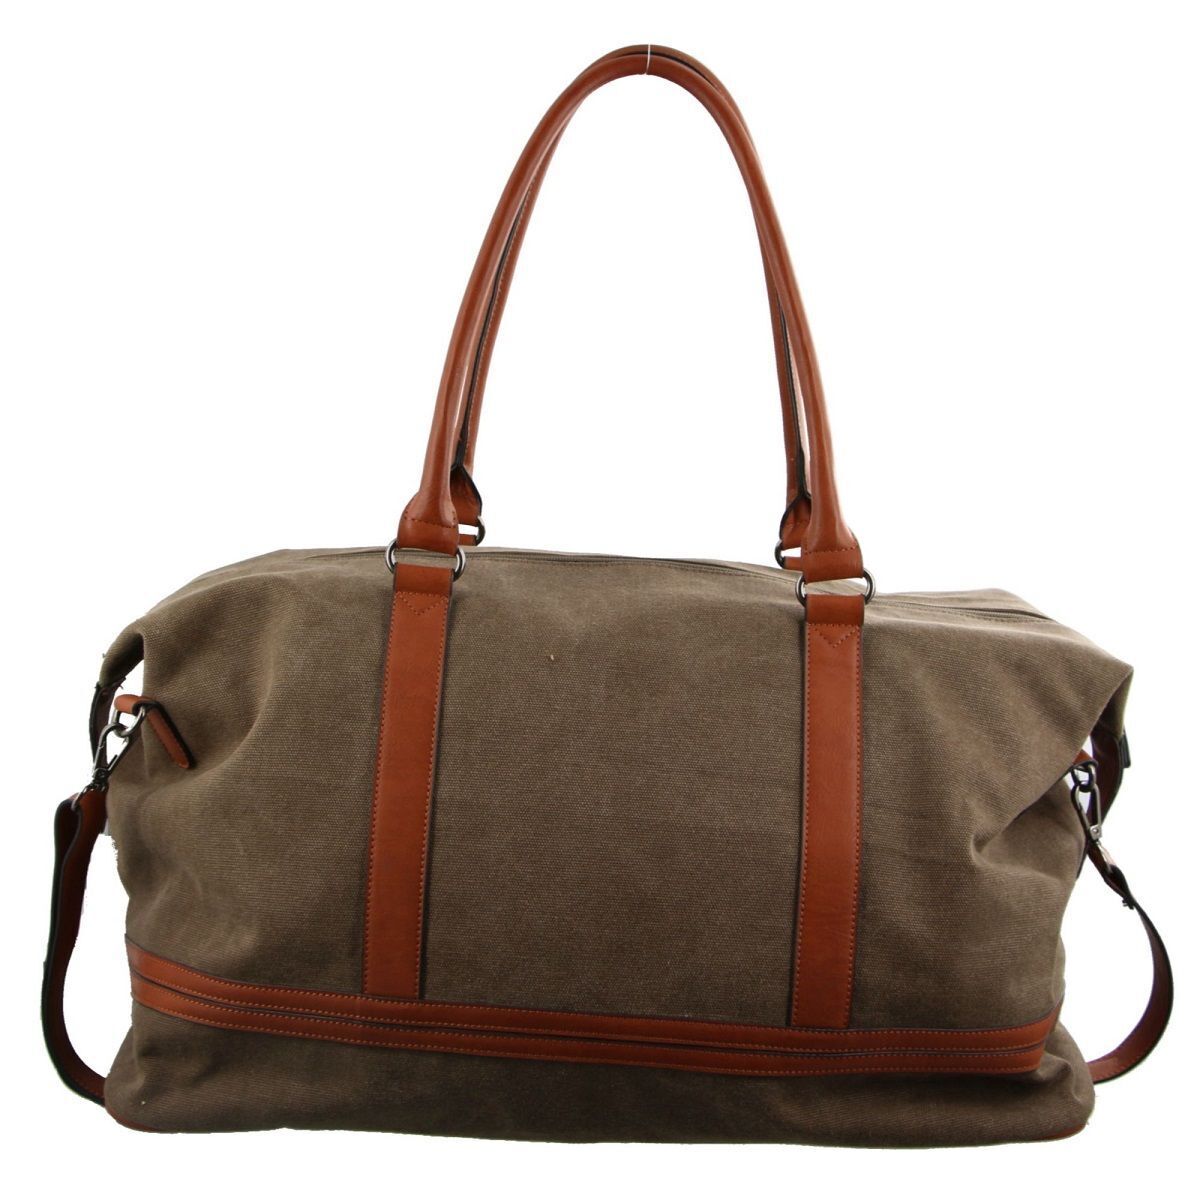 Buy Pierre Cardin Canvas Travel Bag PC2578 Online - Chisel and Charm